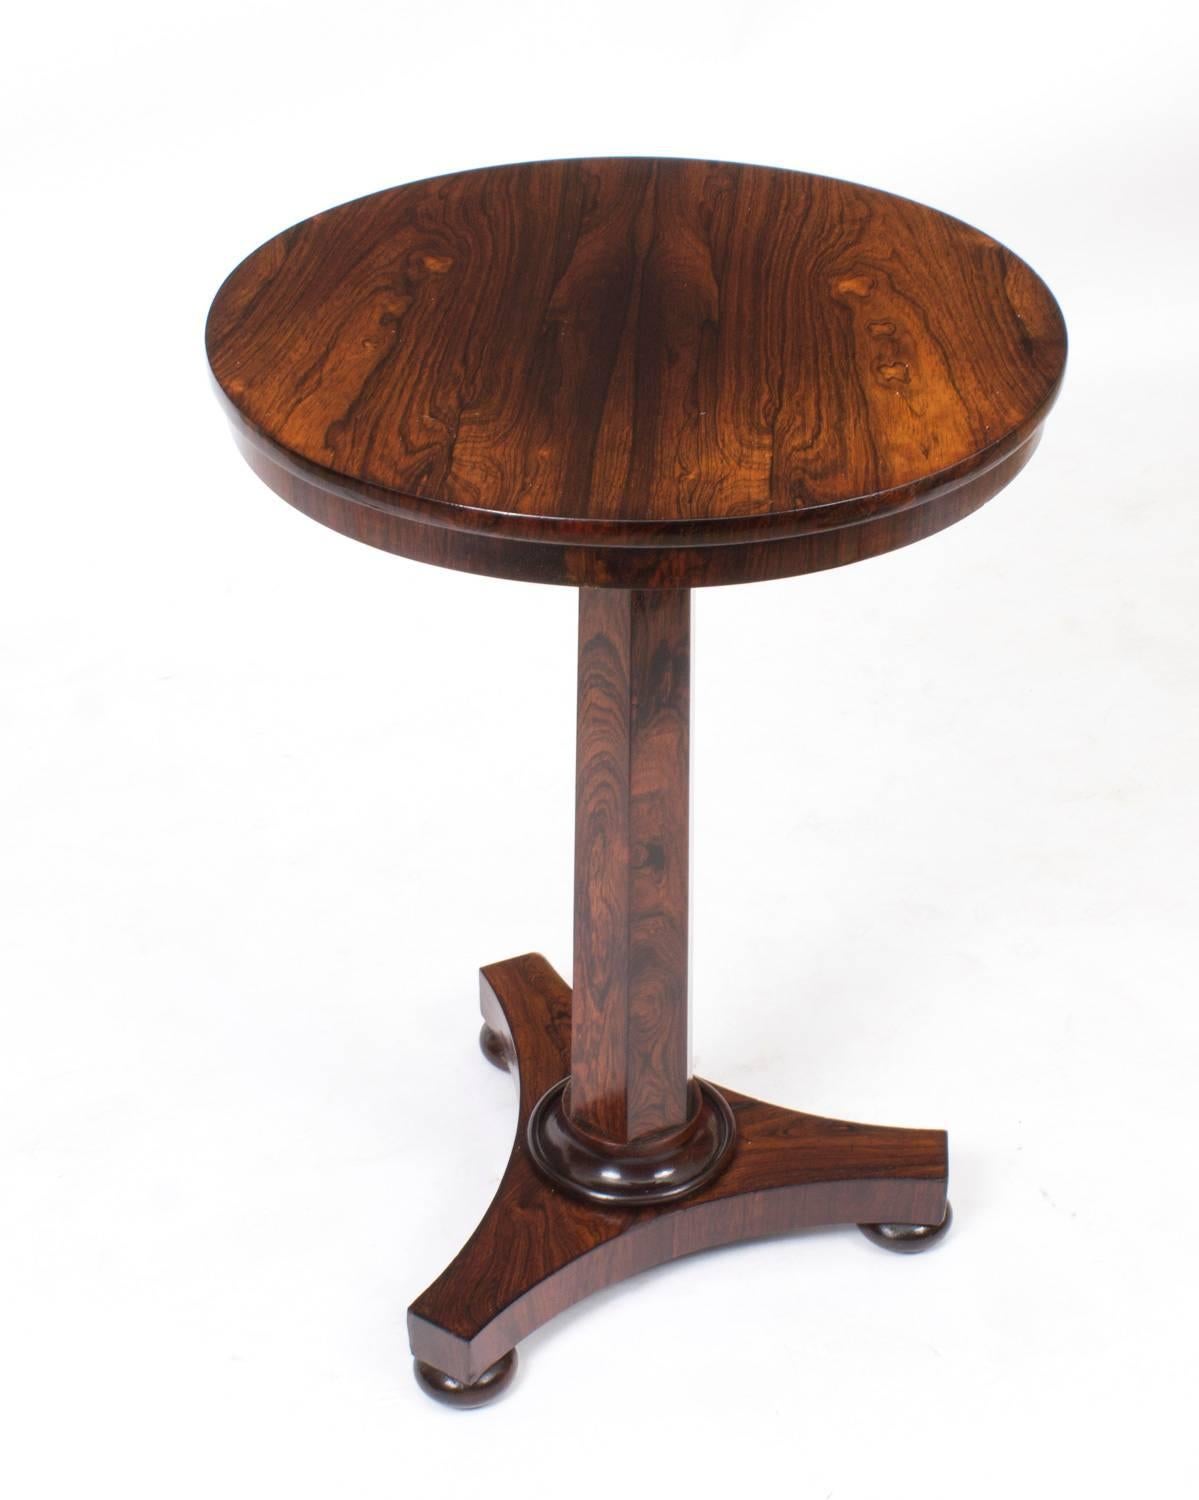 This is a superb antique William IV rosewood occasional table, circa 1830 in date.
It is crafted from beautiful rosewood and is raised on a hexagonal column with a triparte base that rests on bun feet.
This elegant occasional table will make a